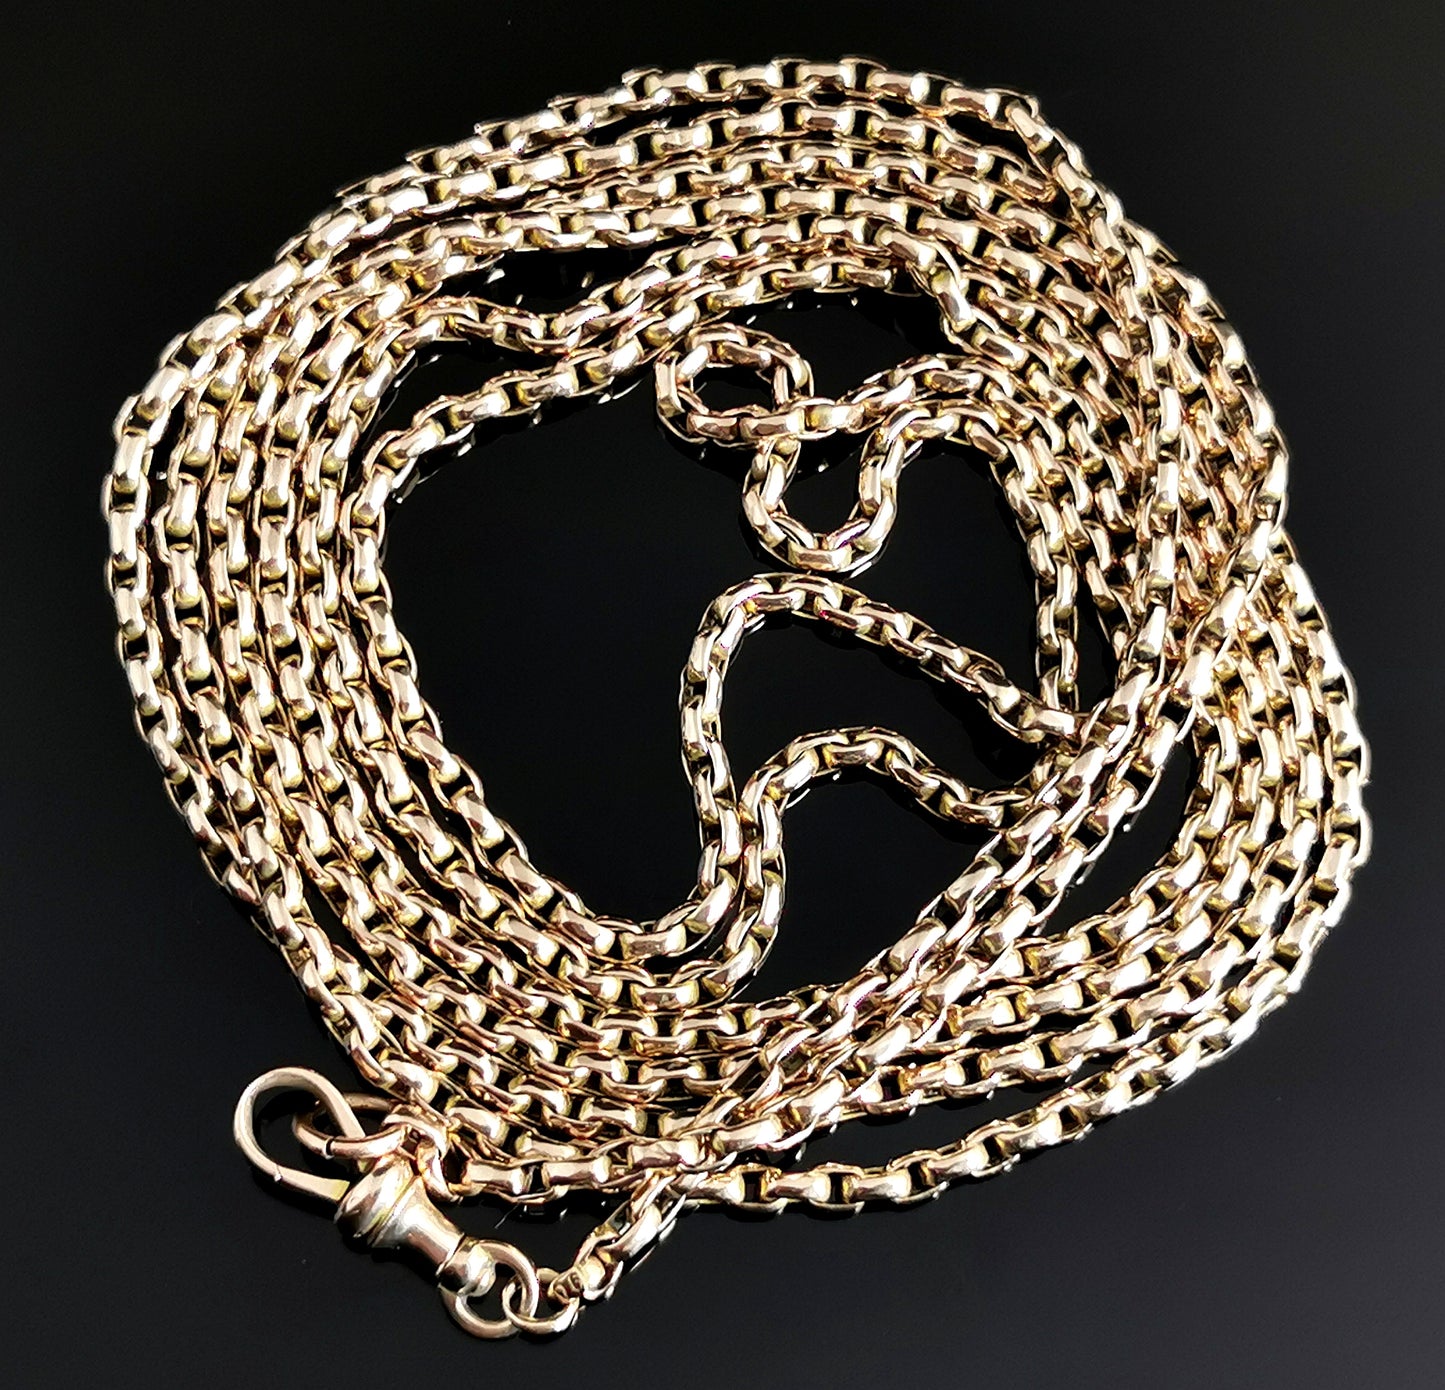 Antique 9ct gold longuard chain necklace, muff chain